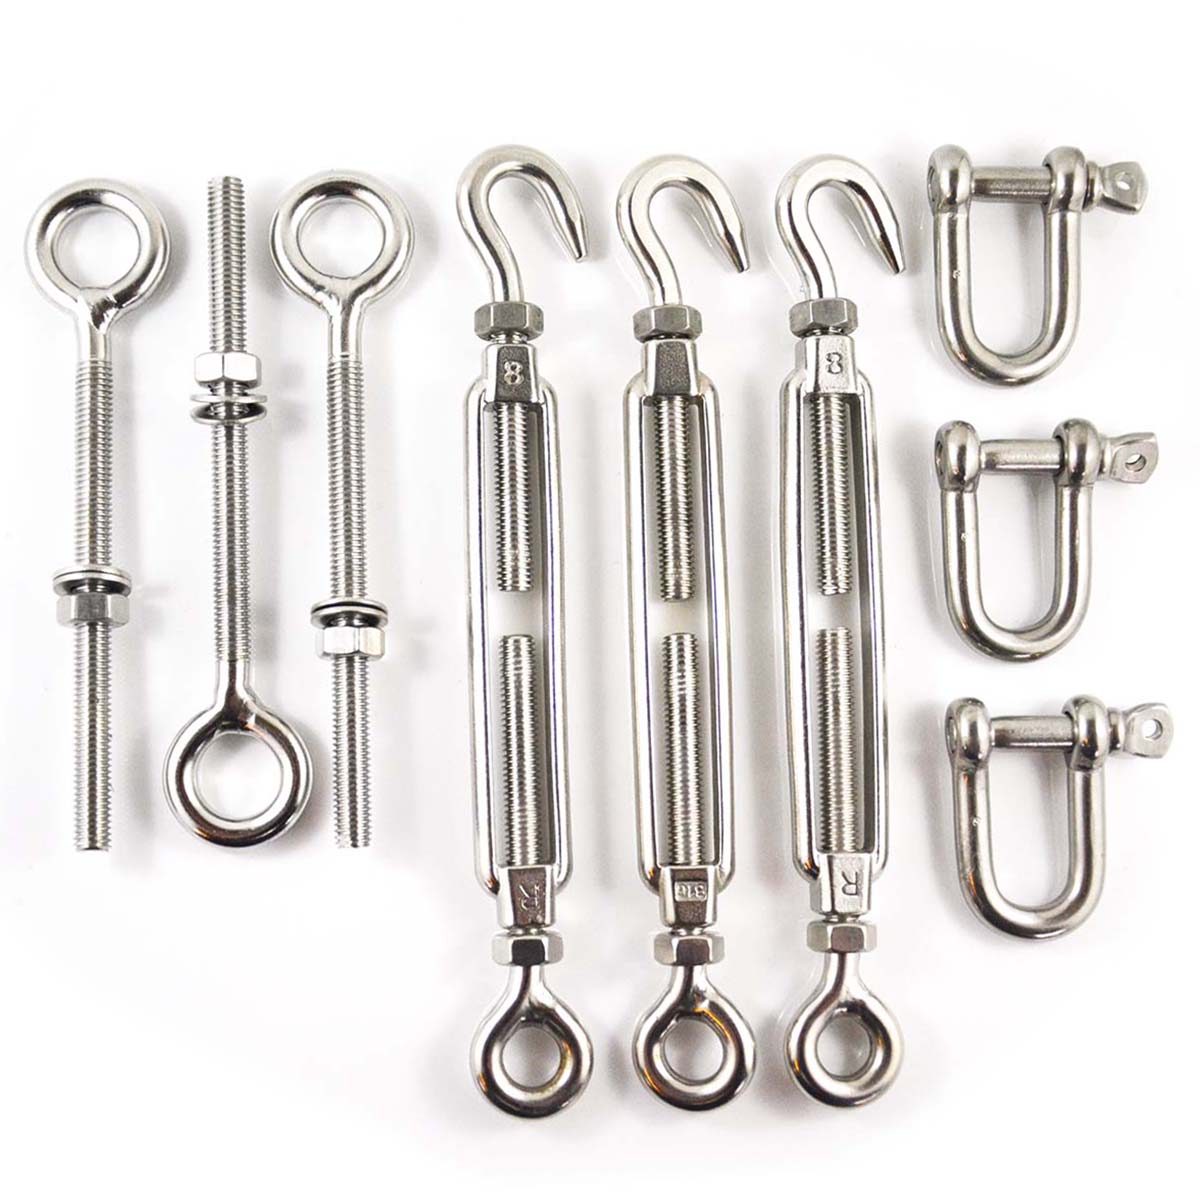 Shade Sail Stainless Steel Fittings Kit #1